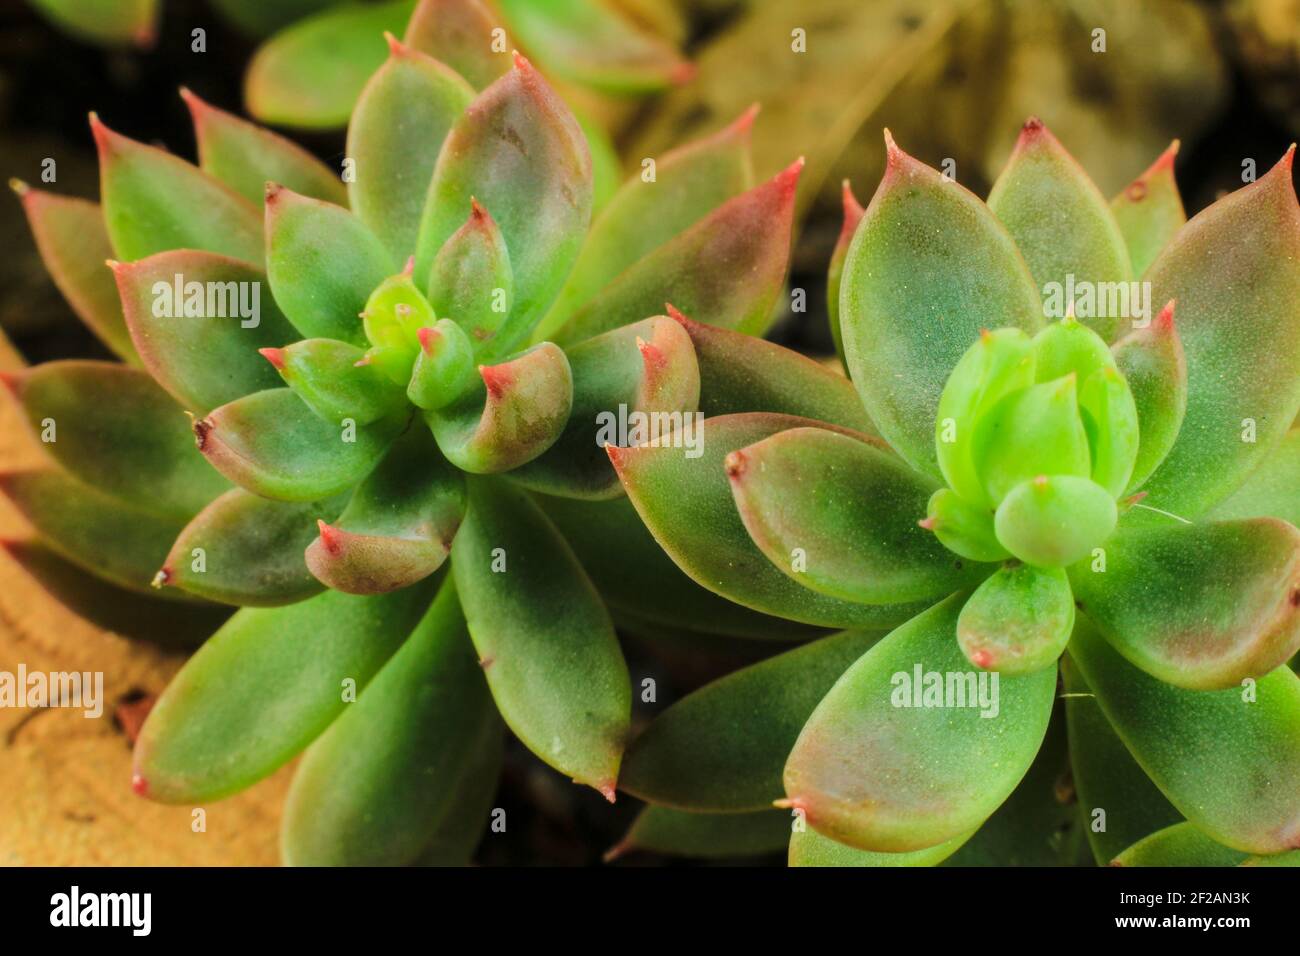 Beautiful Echeveria Agavoides succulent plant in the garden Stock Photo